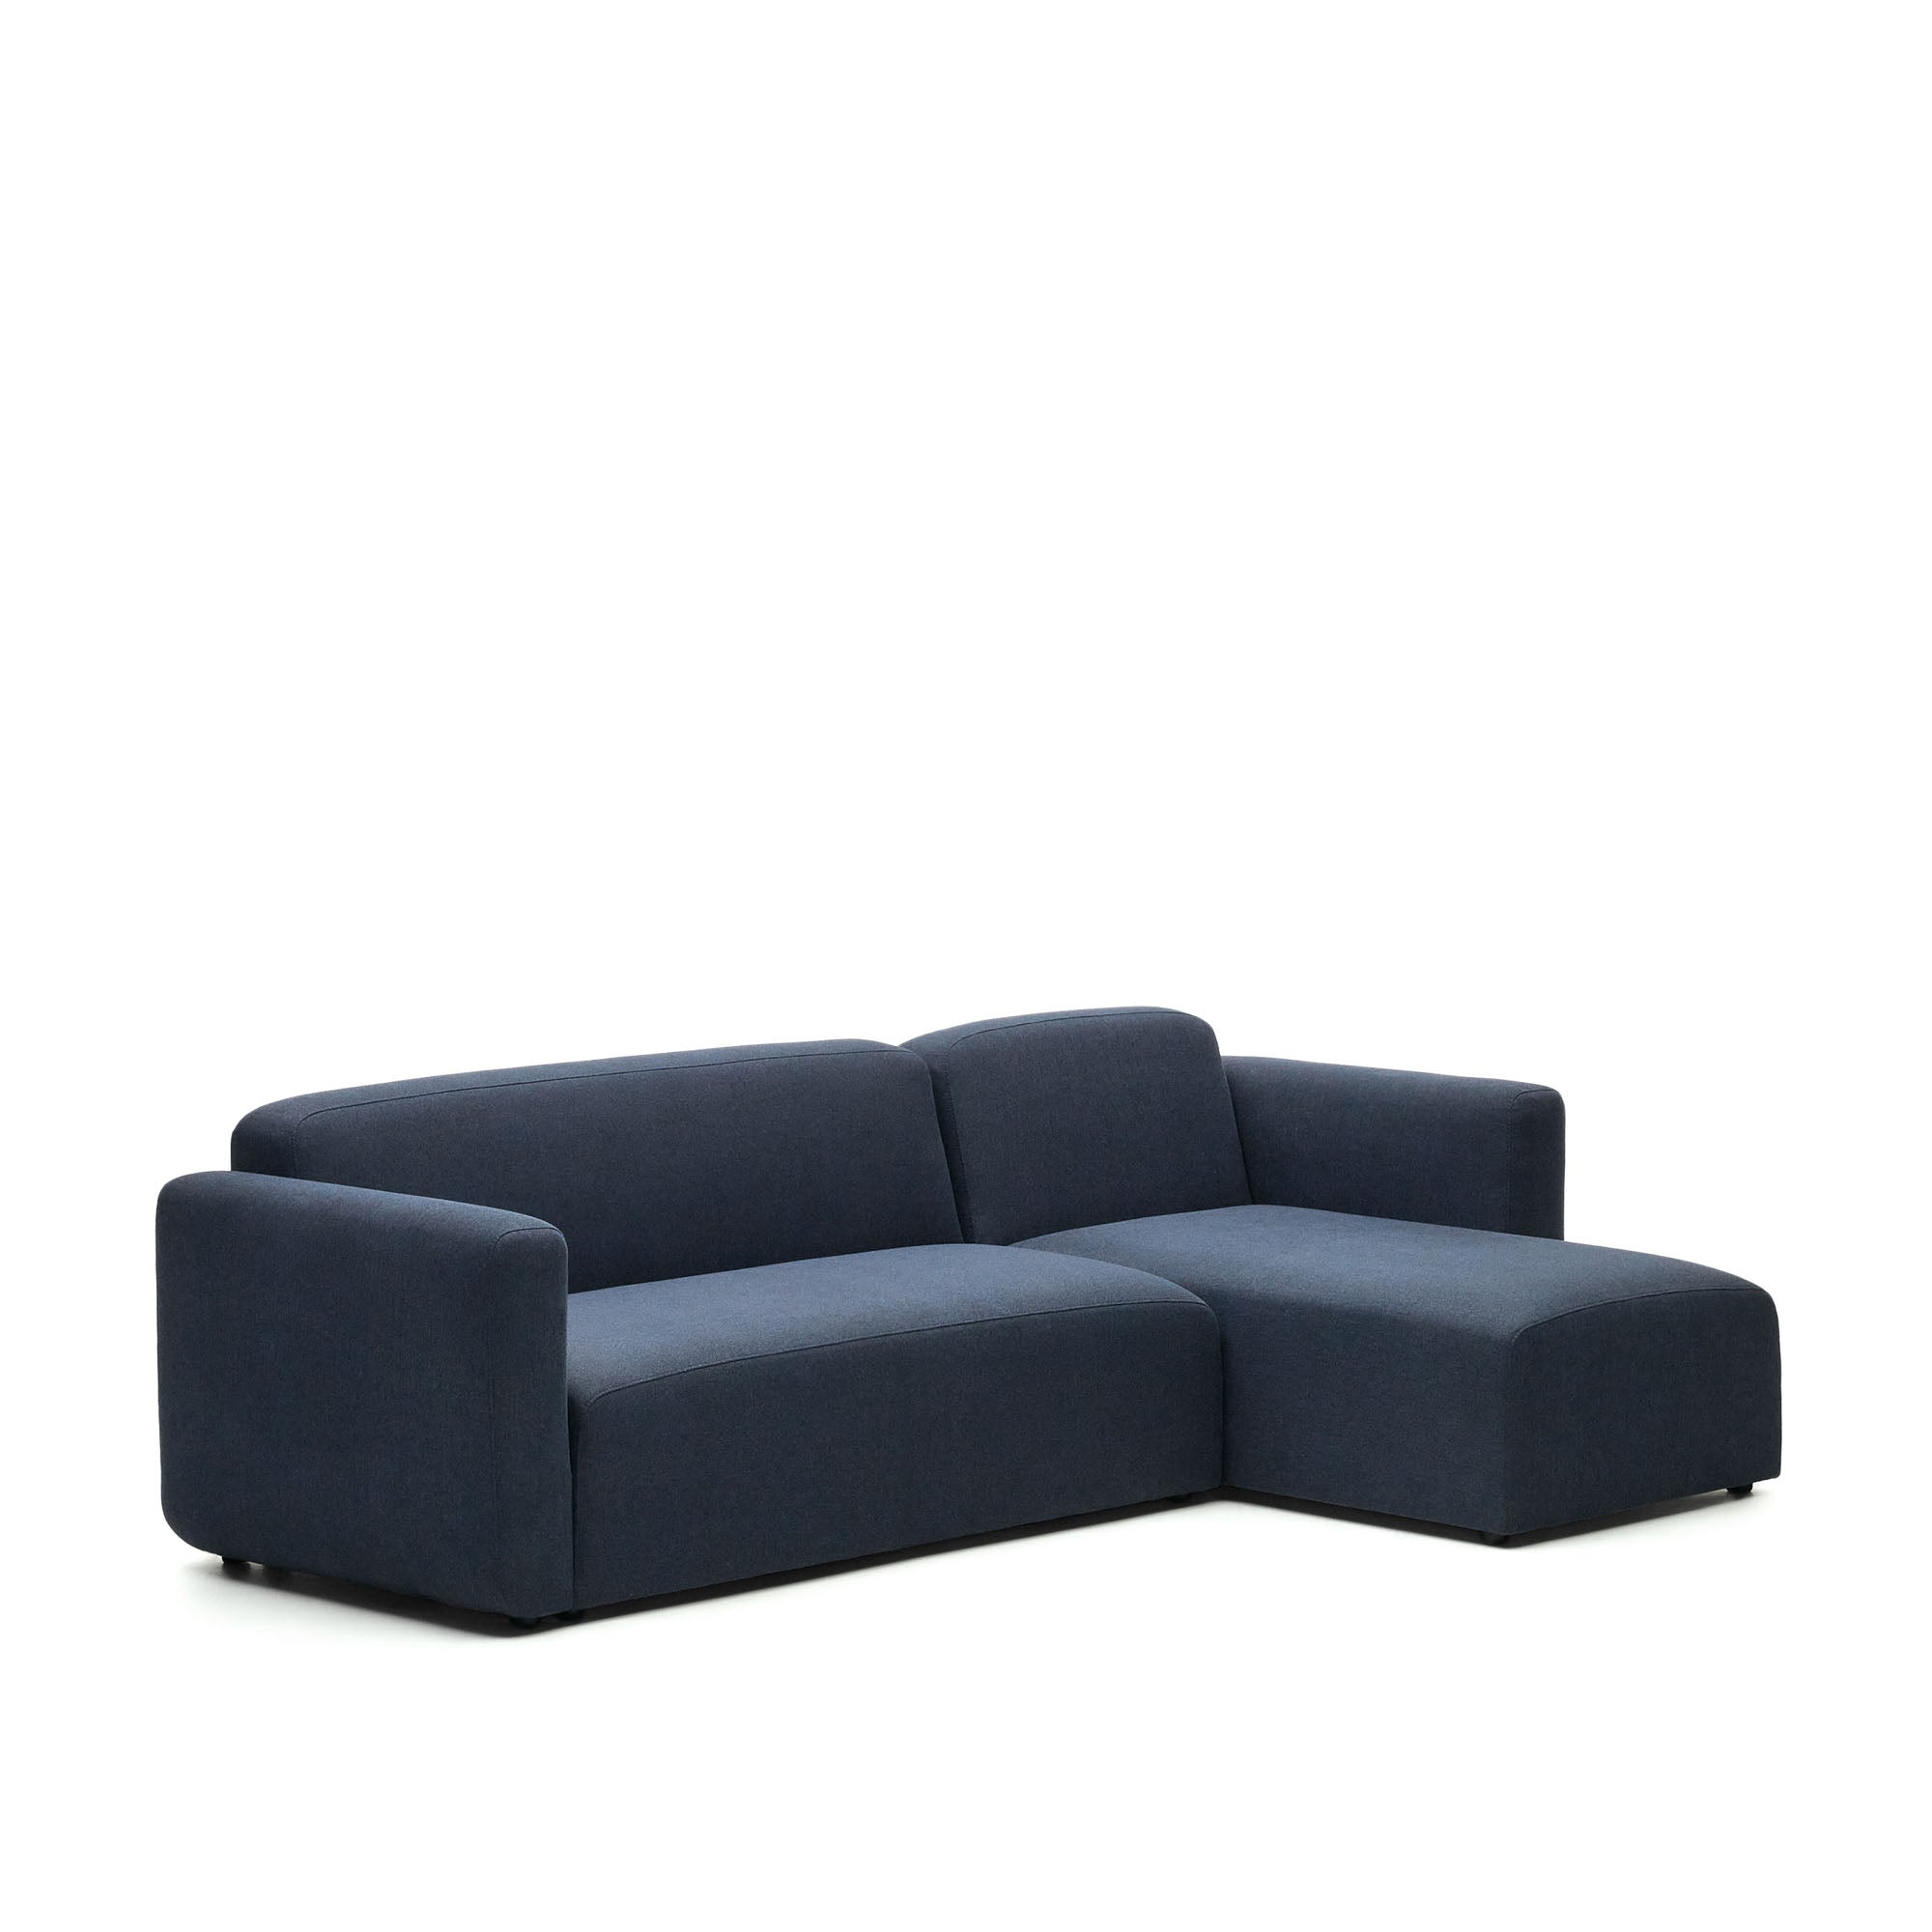 Neom 3 seater modular sofa, right/left chaise longue in blue, 263 cm